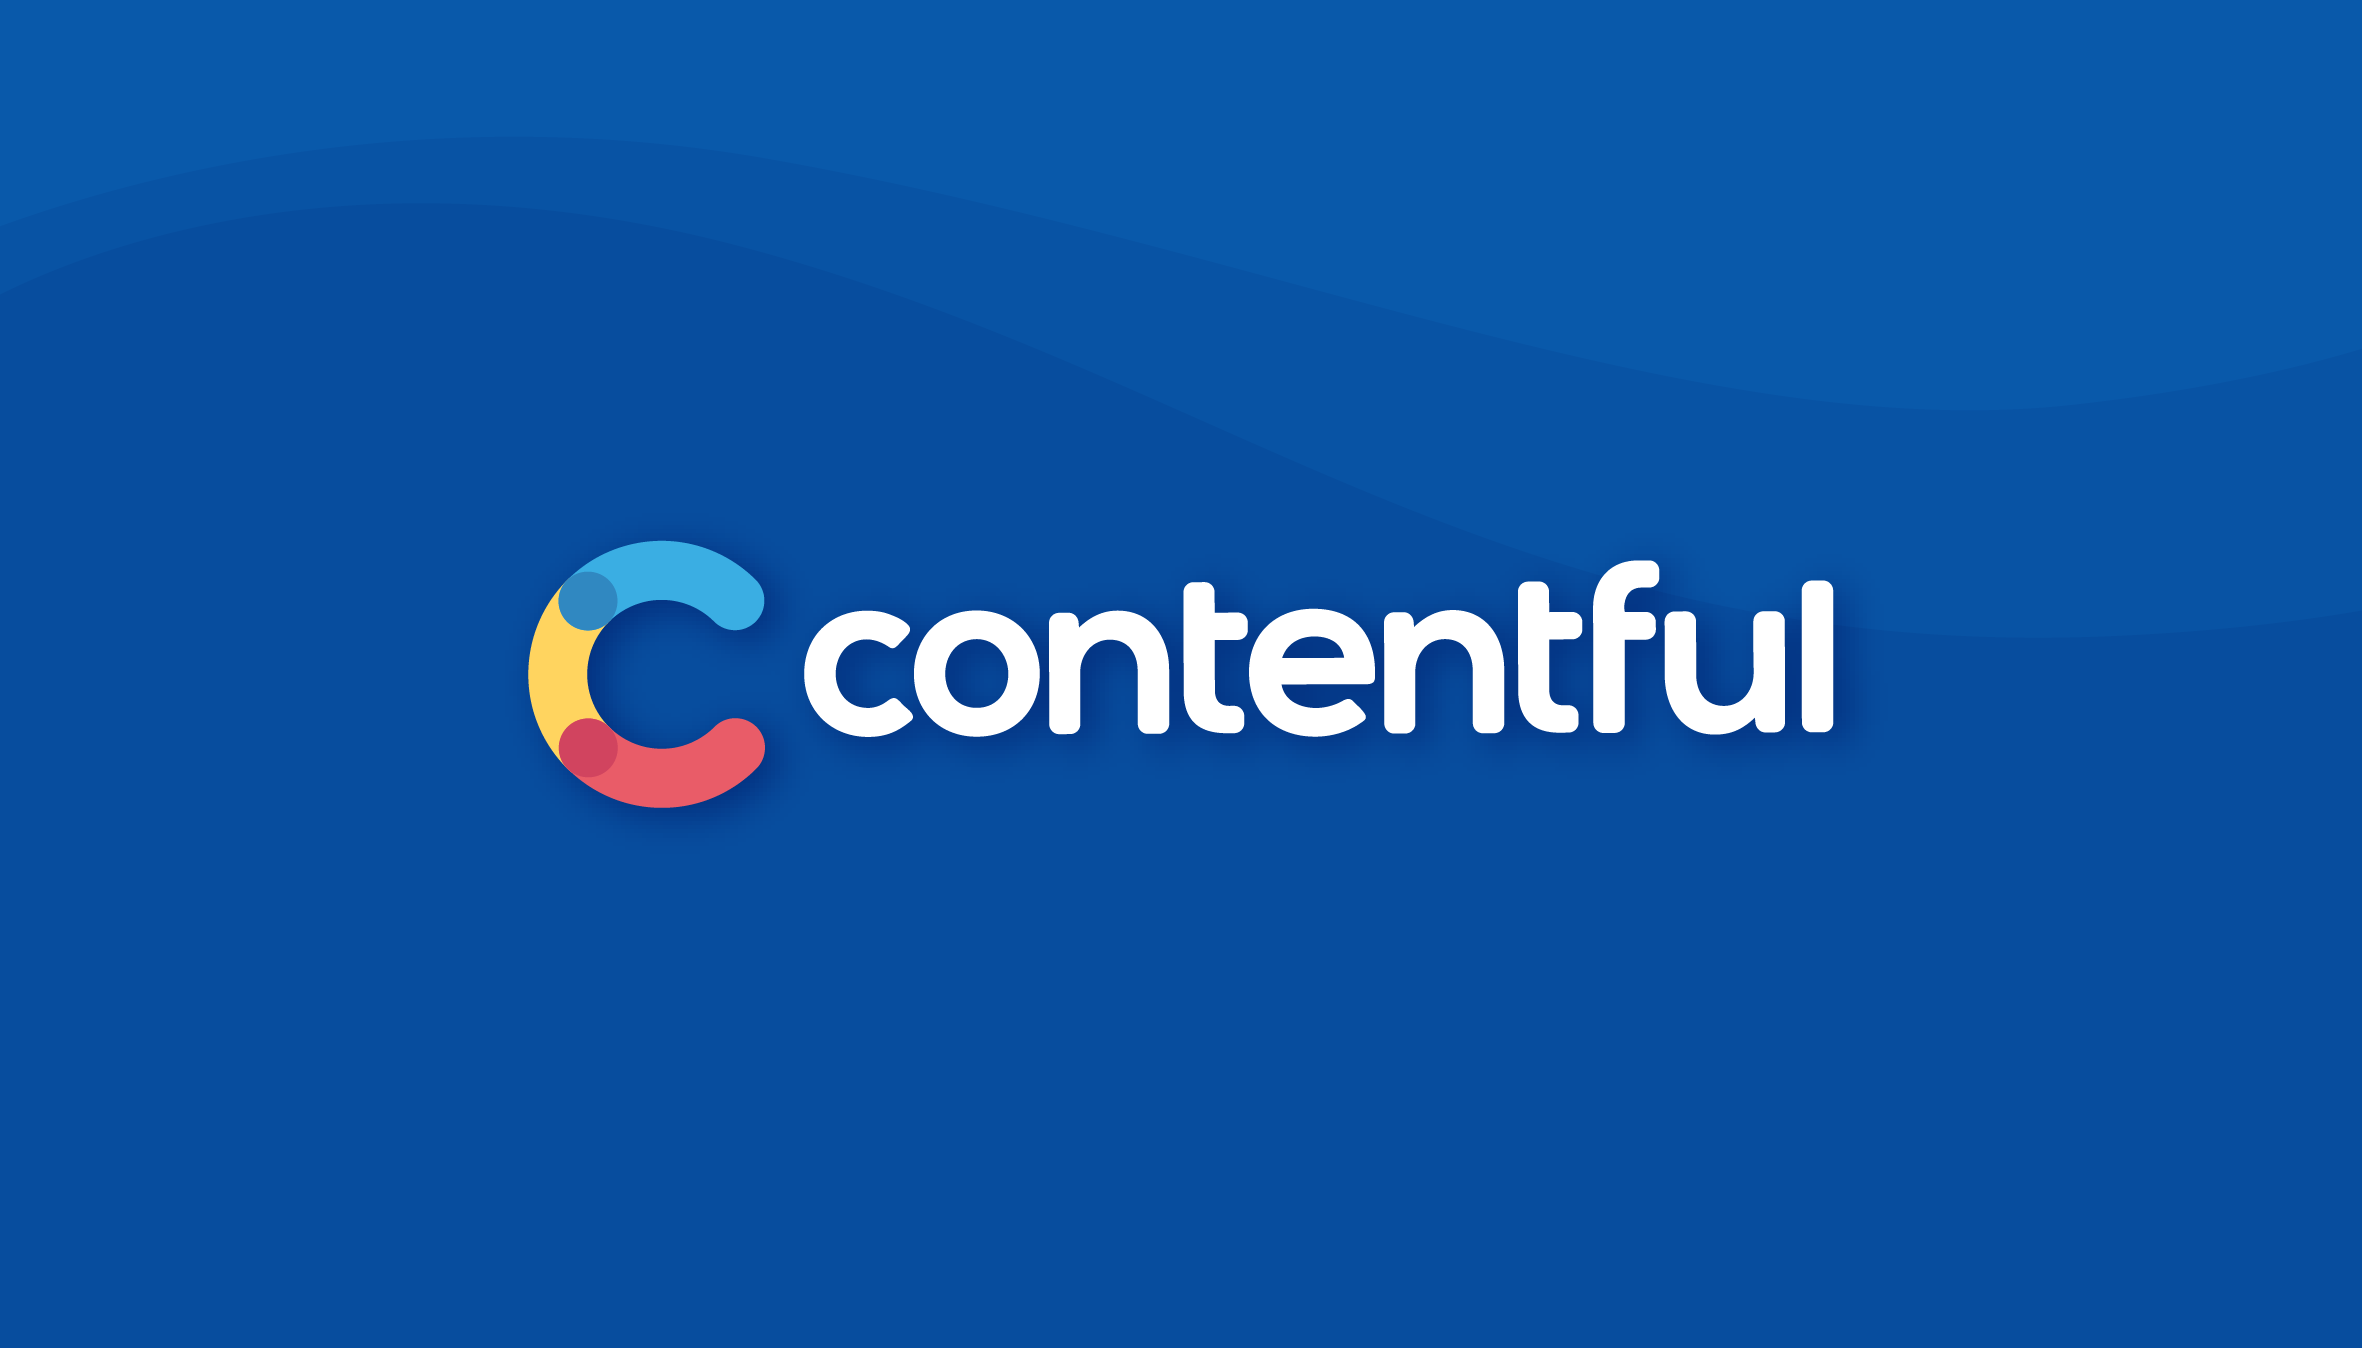 Tips to Follow While Working on Contentful CMS